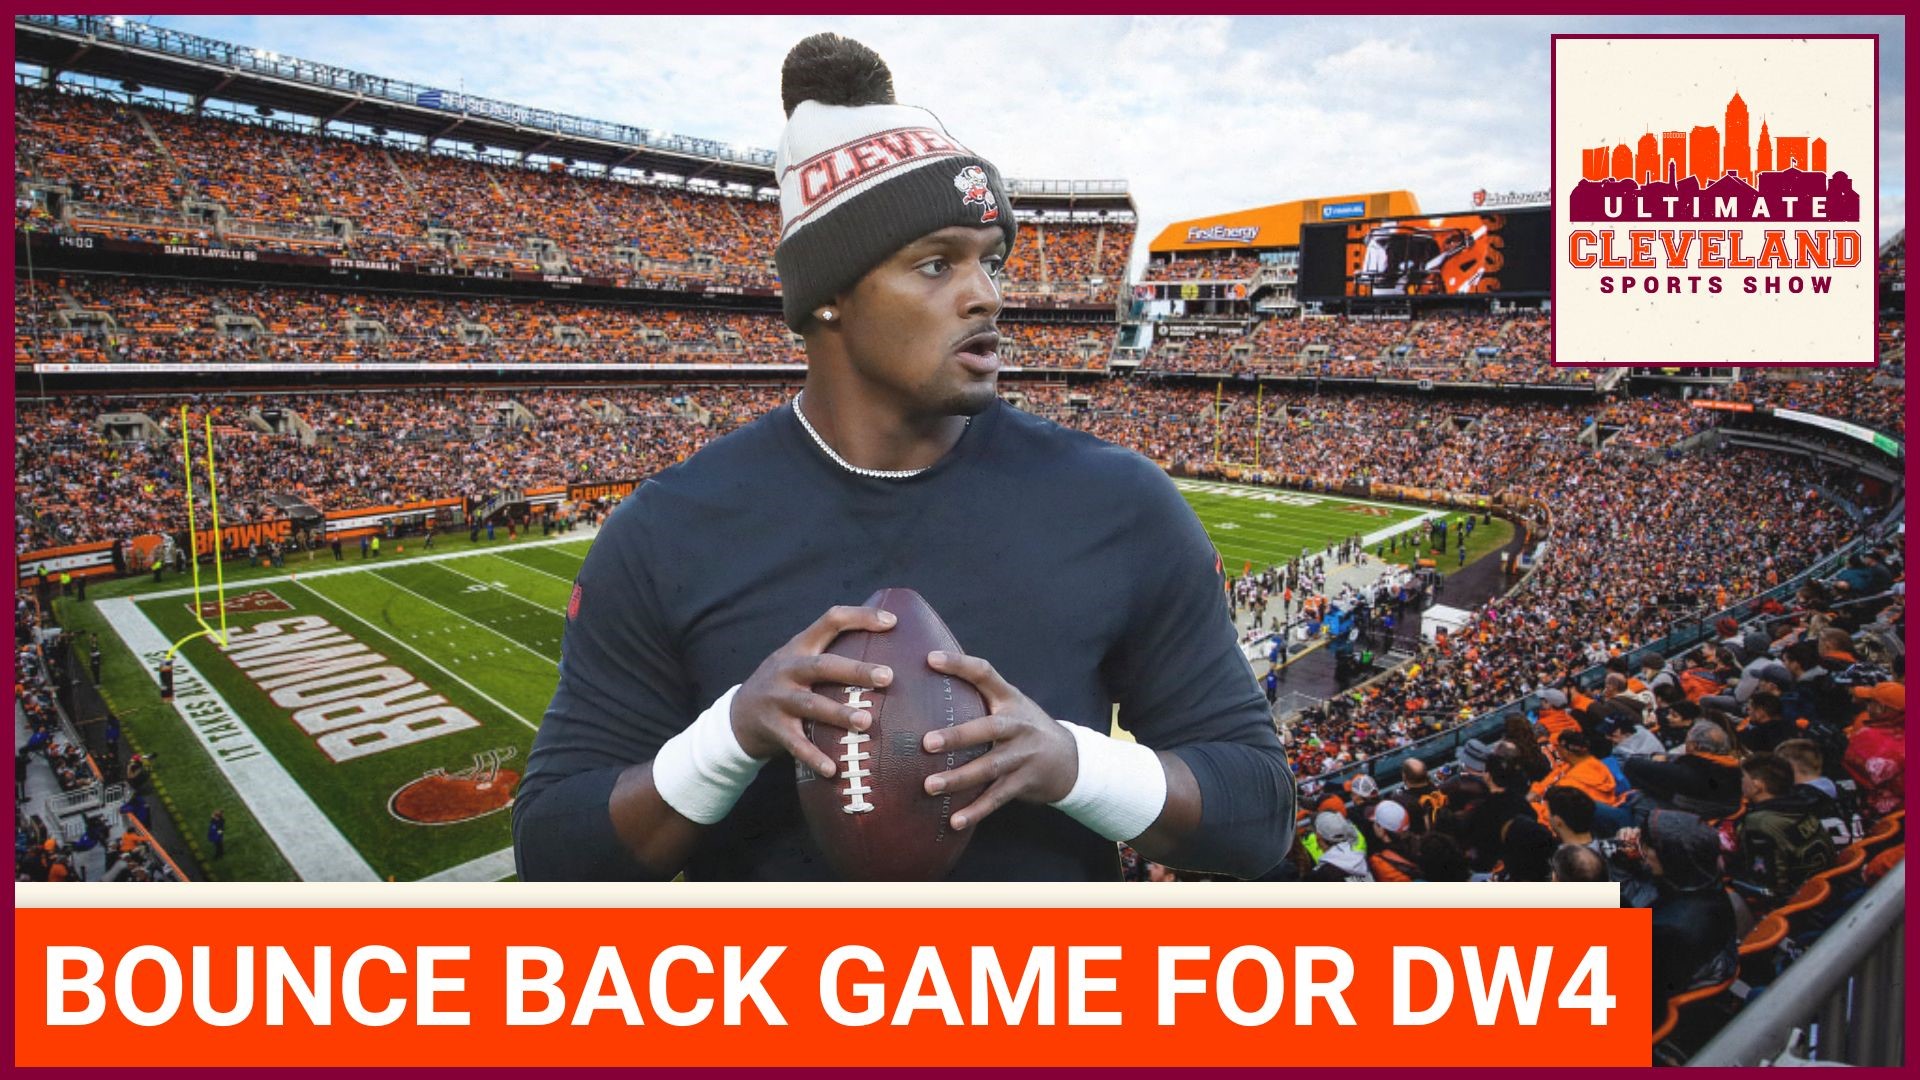 Can Deshaun Watson regain the trust of the Cleveland Browns faithful with a good game against the Tennessee Titans?